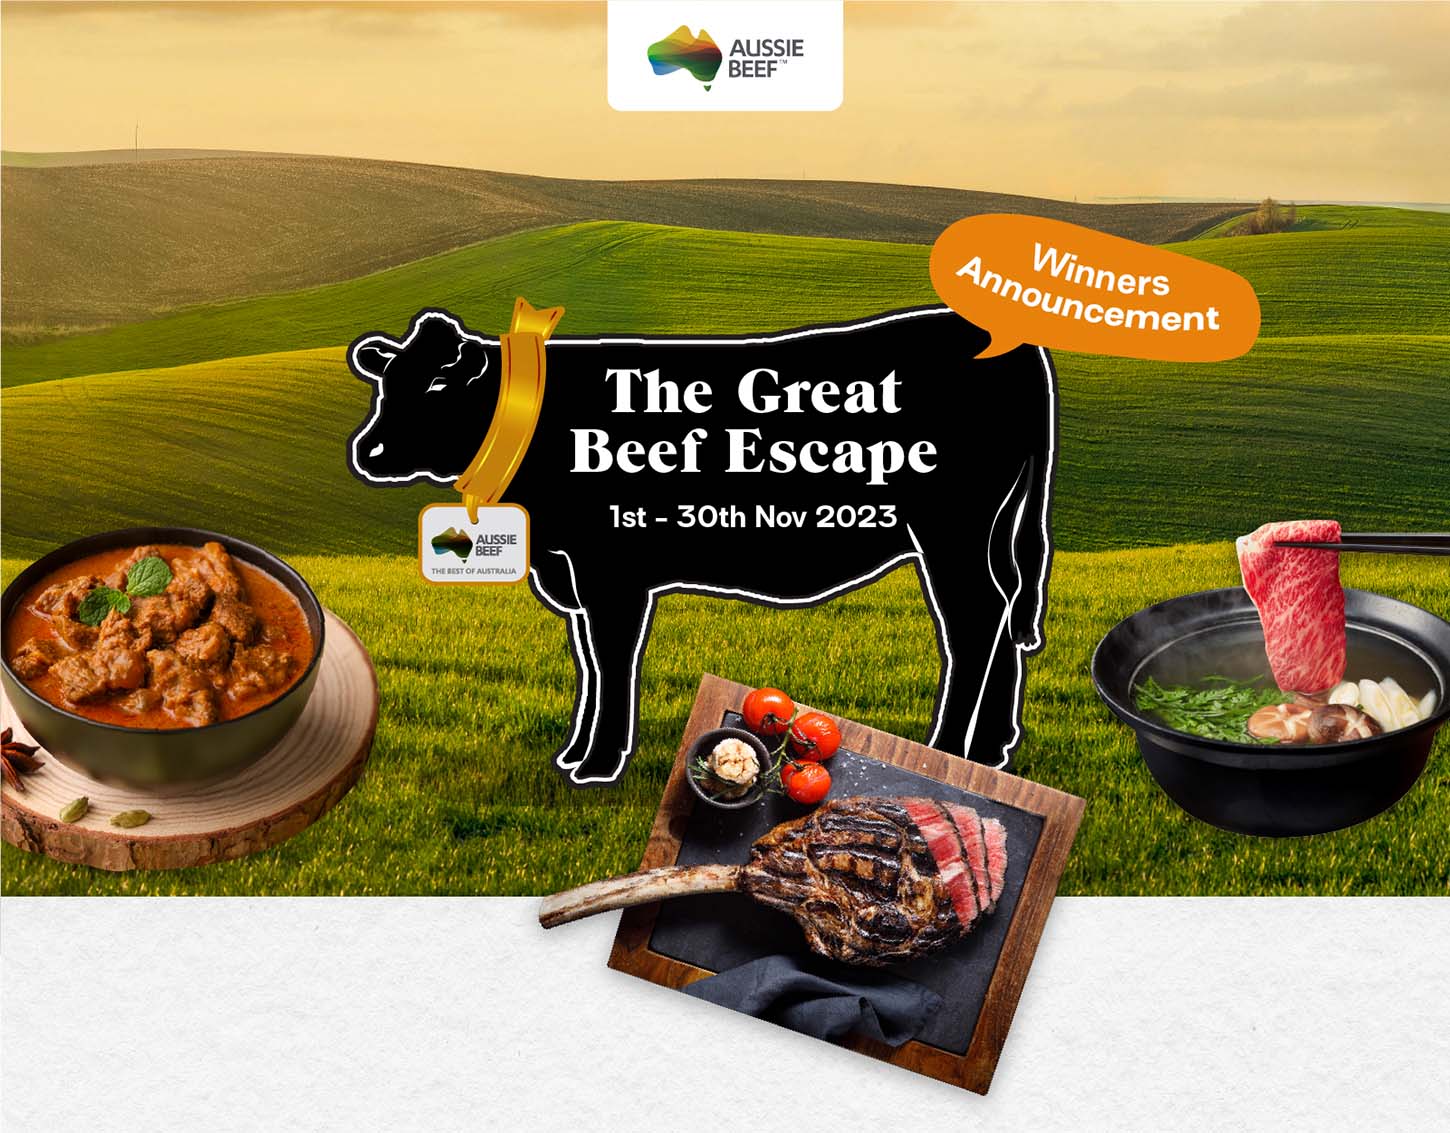 The Great Beef Escape: Winners Announcement